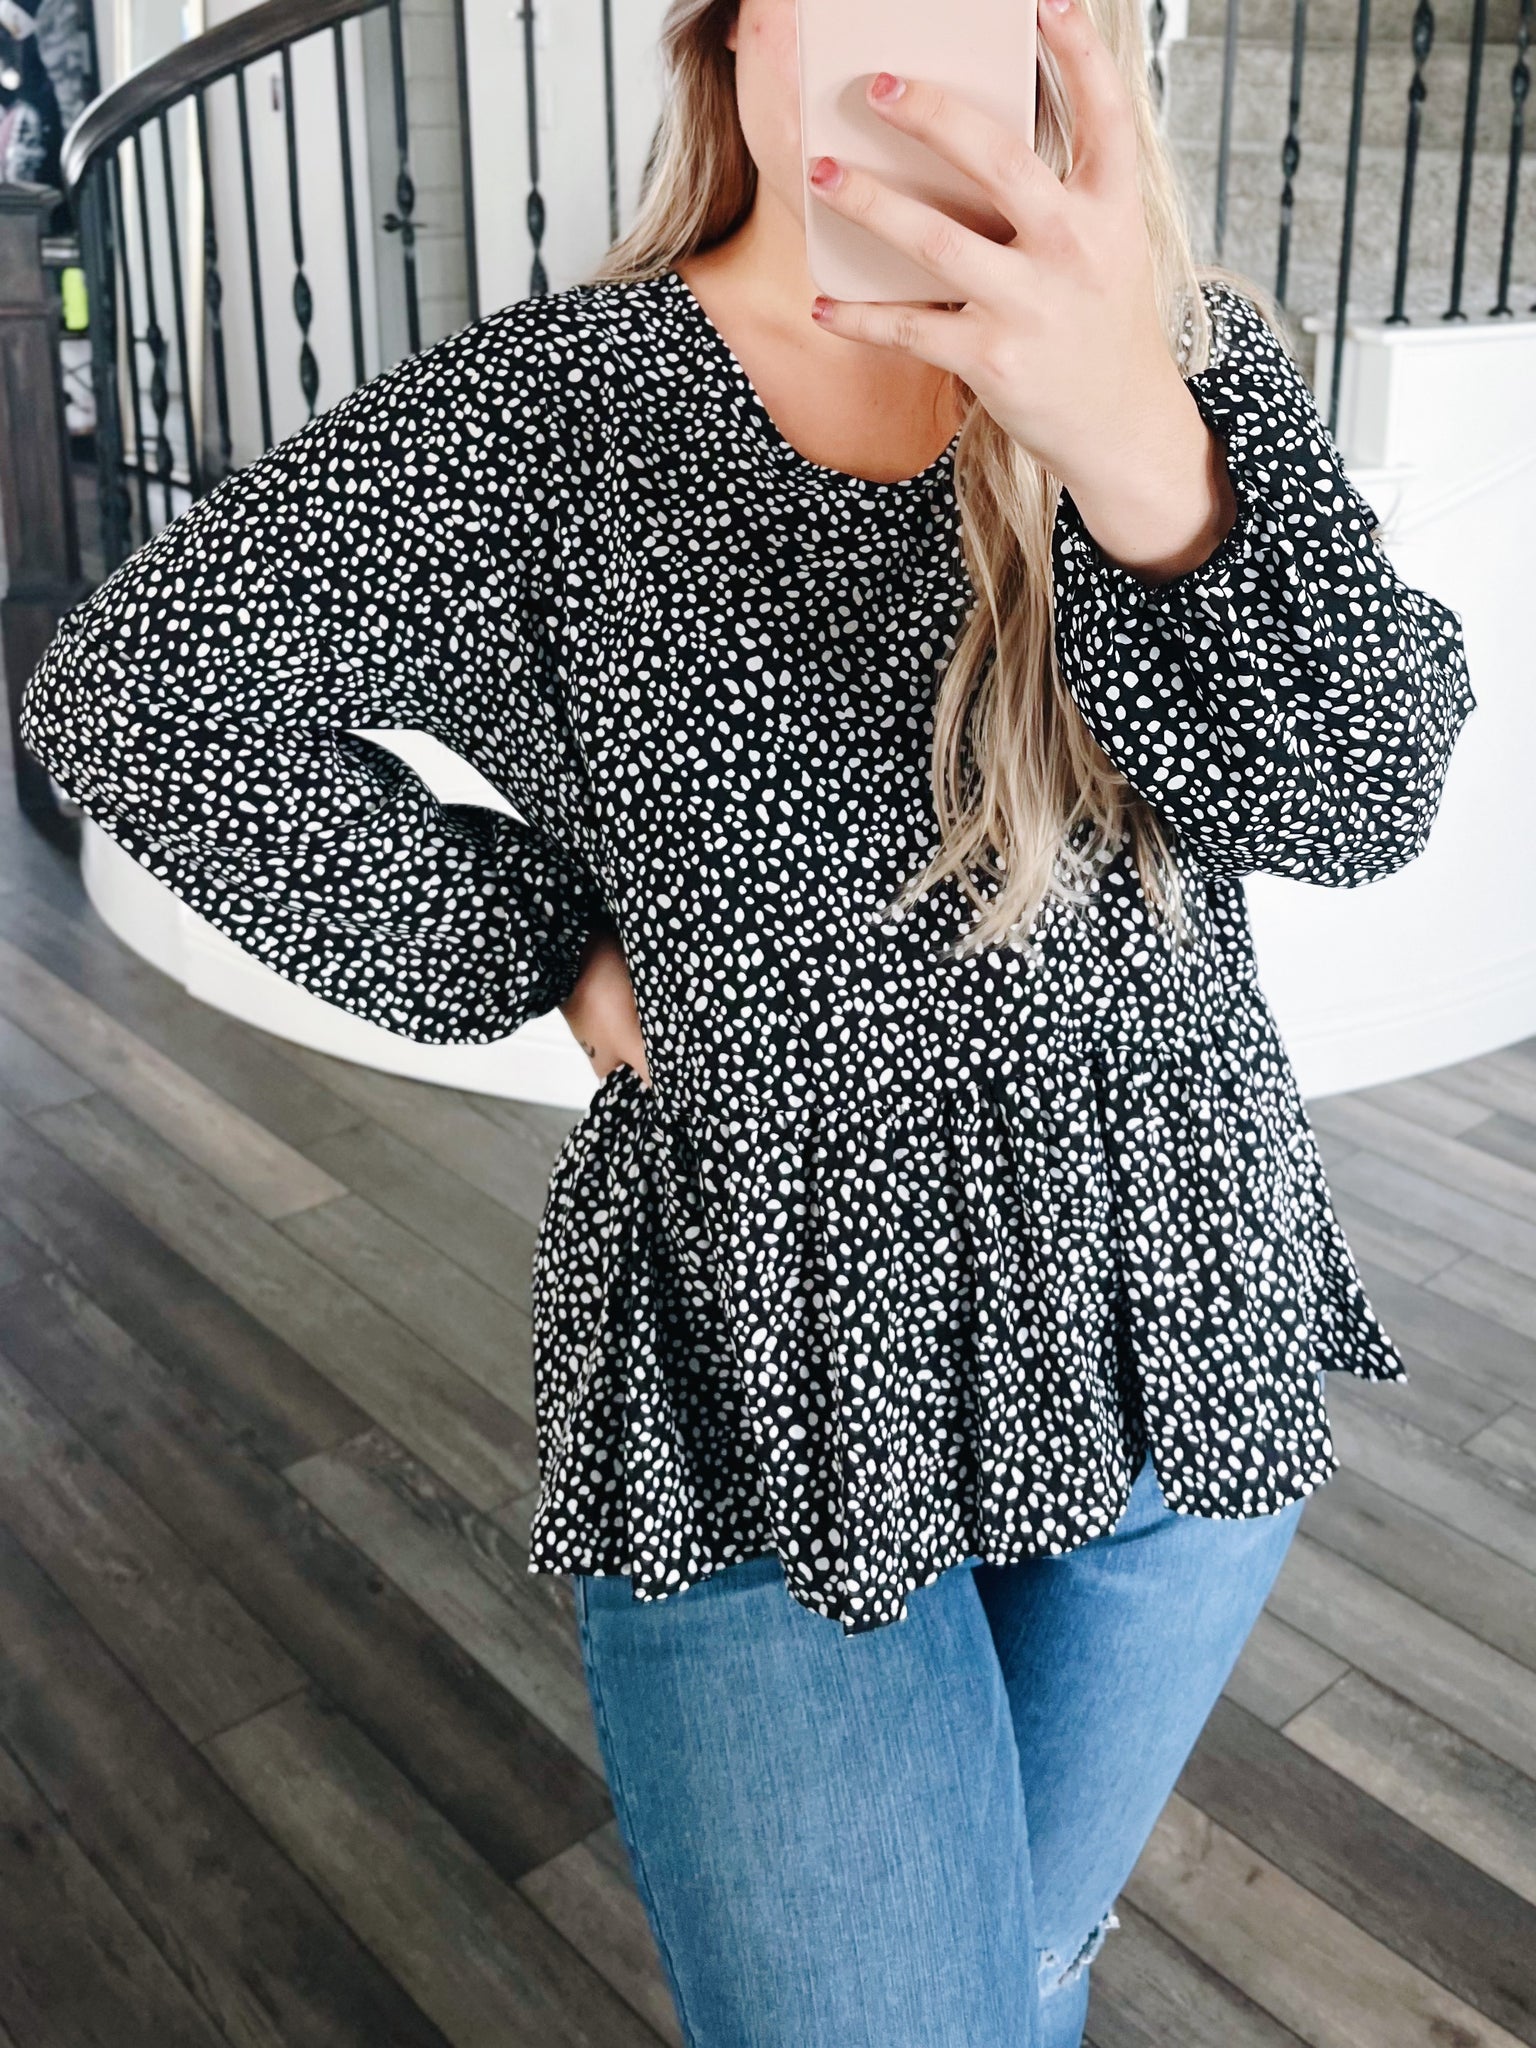 Poppy Black Spotted Top